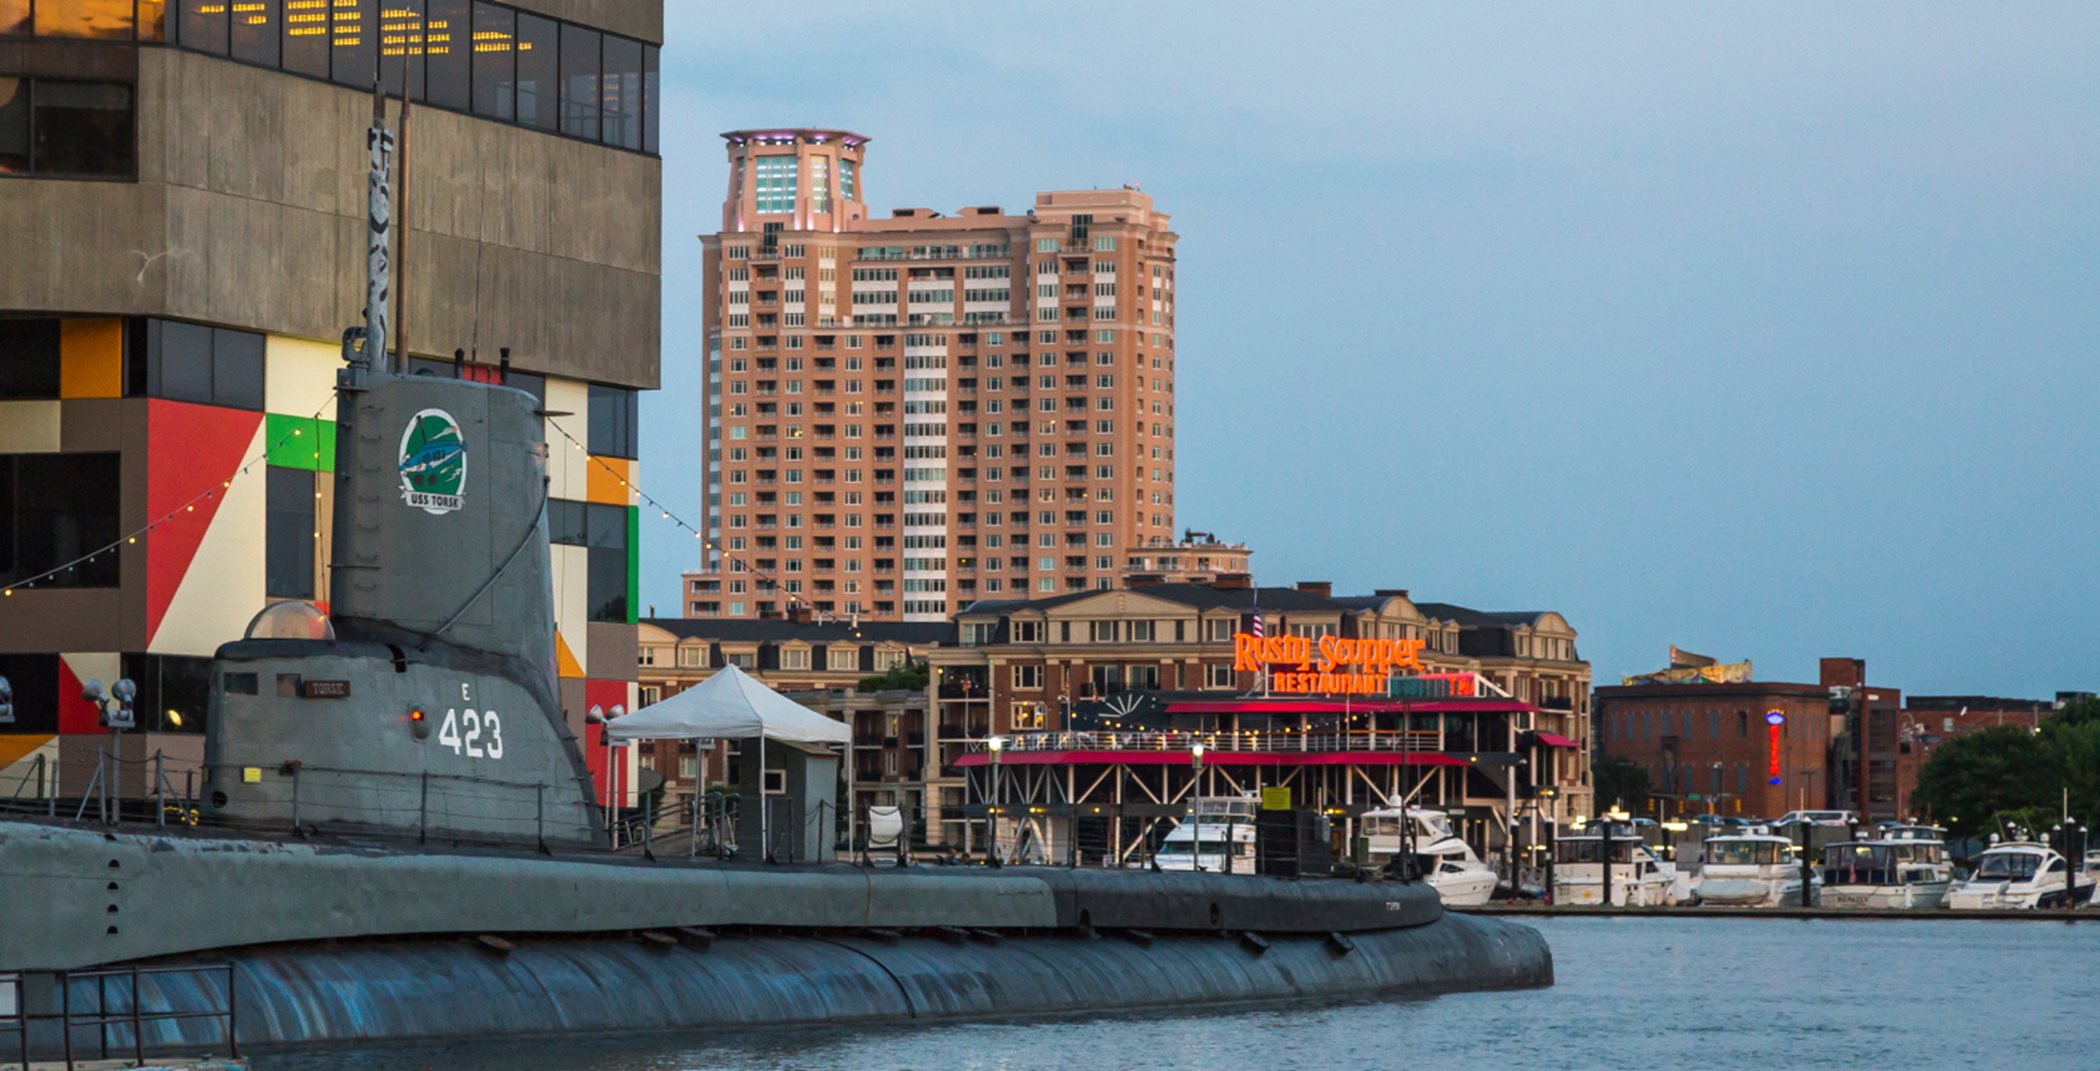 Baltimore’s Inner Harbor features historic warships